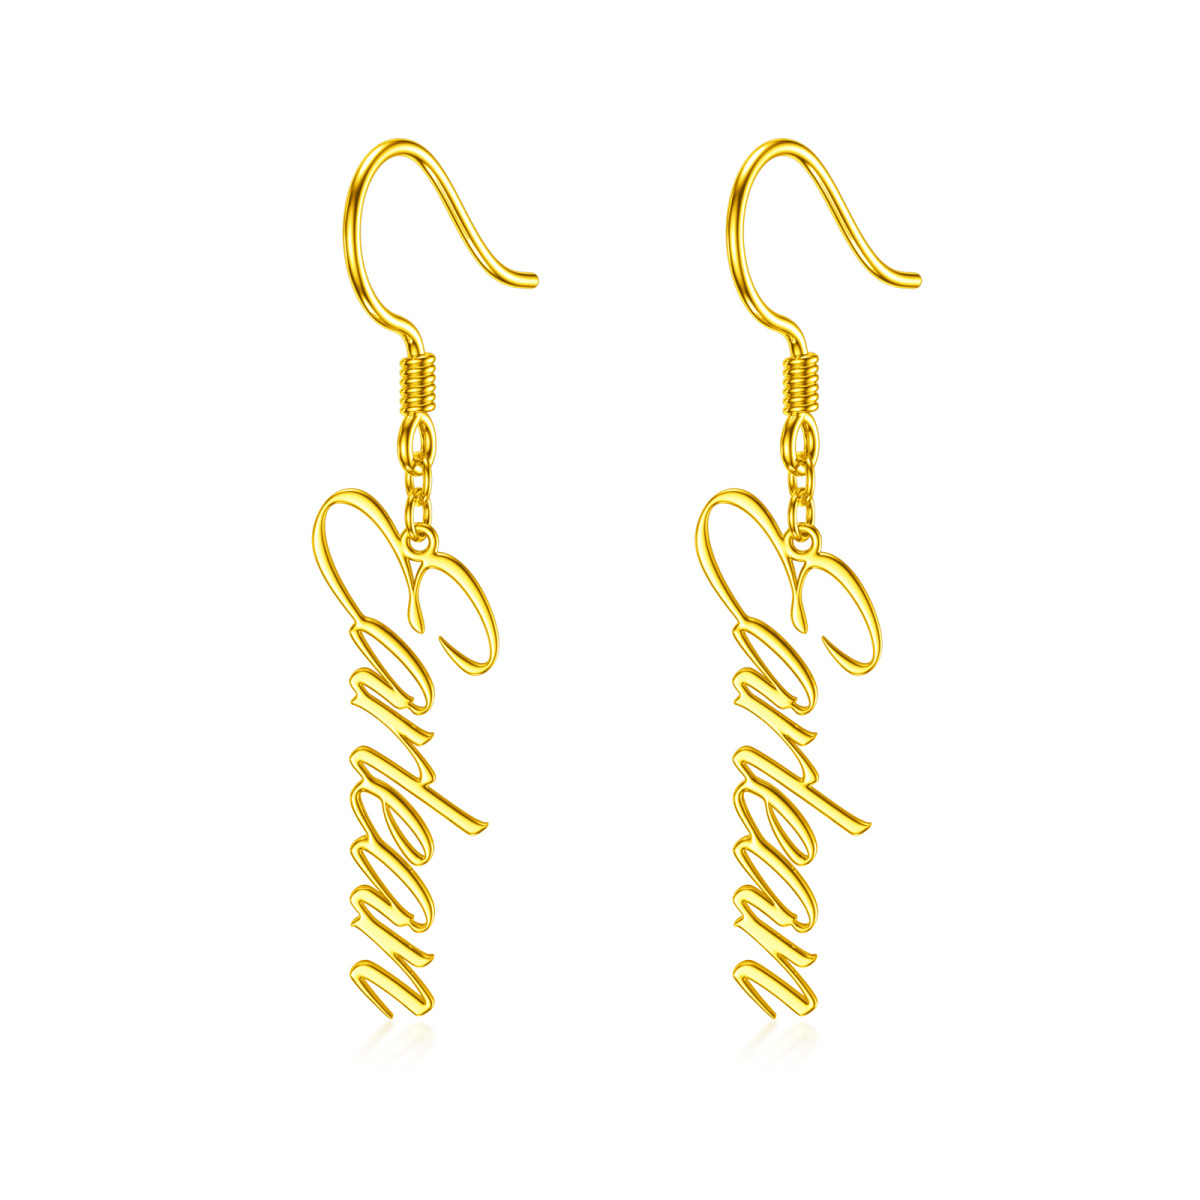 10K Gold Personalized Classic Name Drop Earrings-1